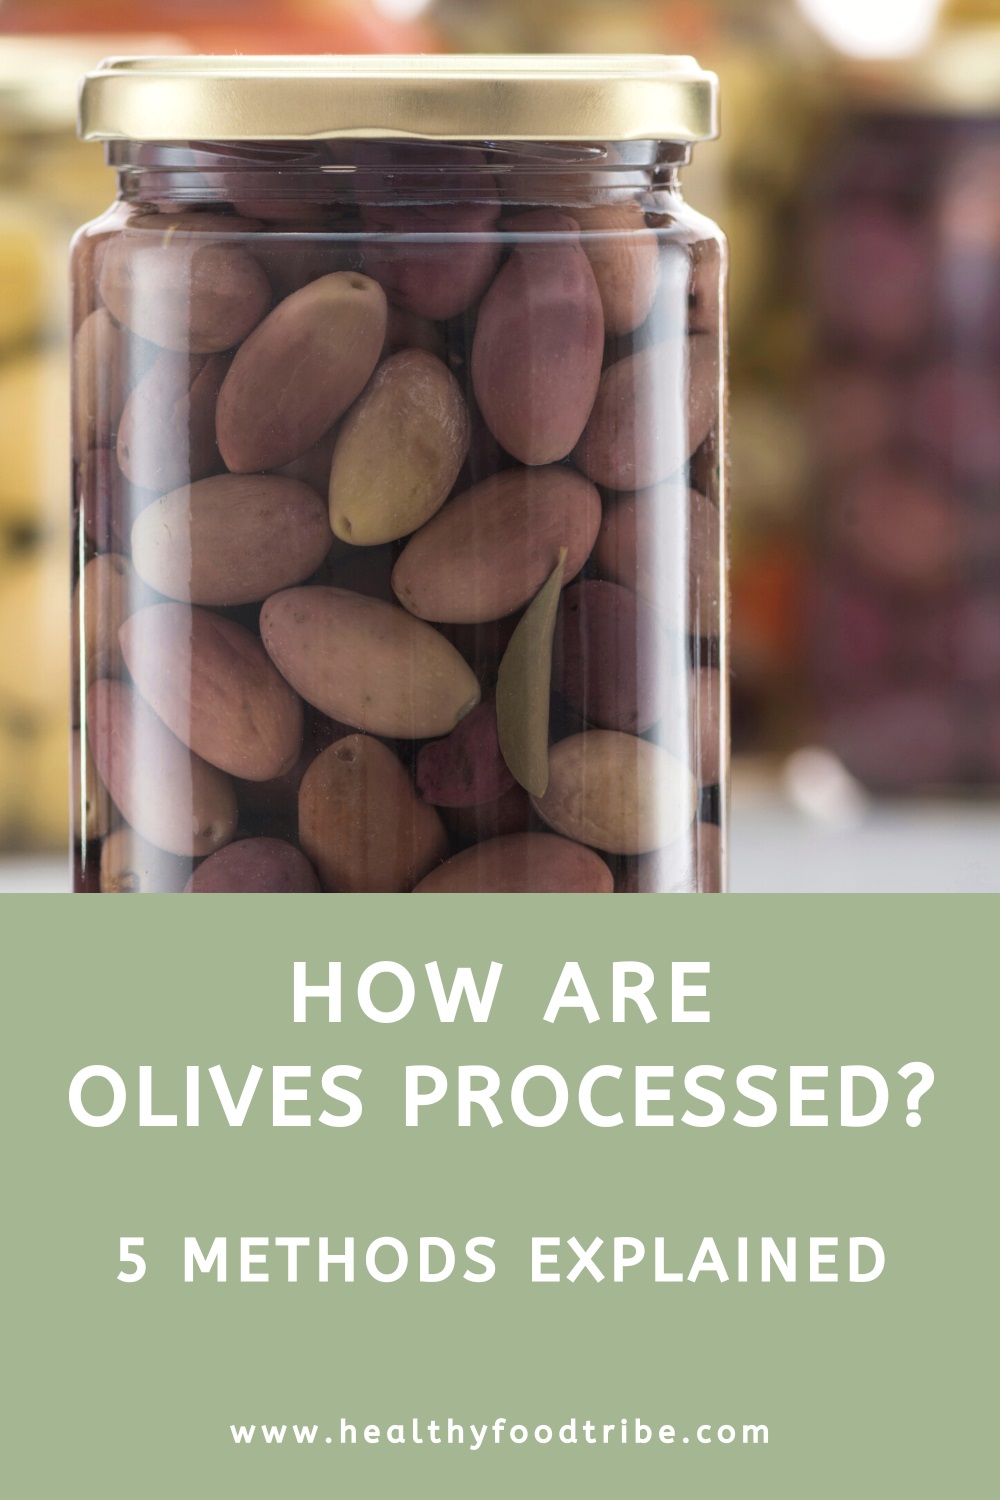 5 Methods to process olives explained